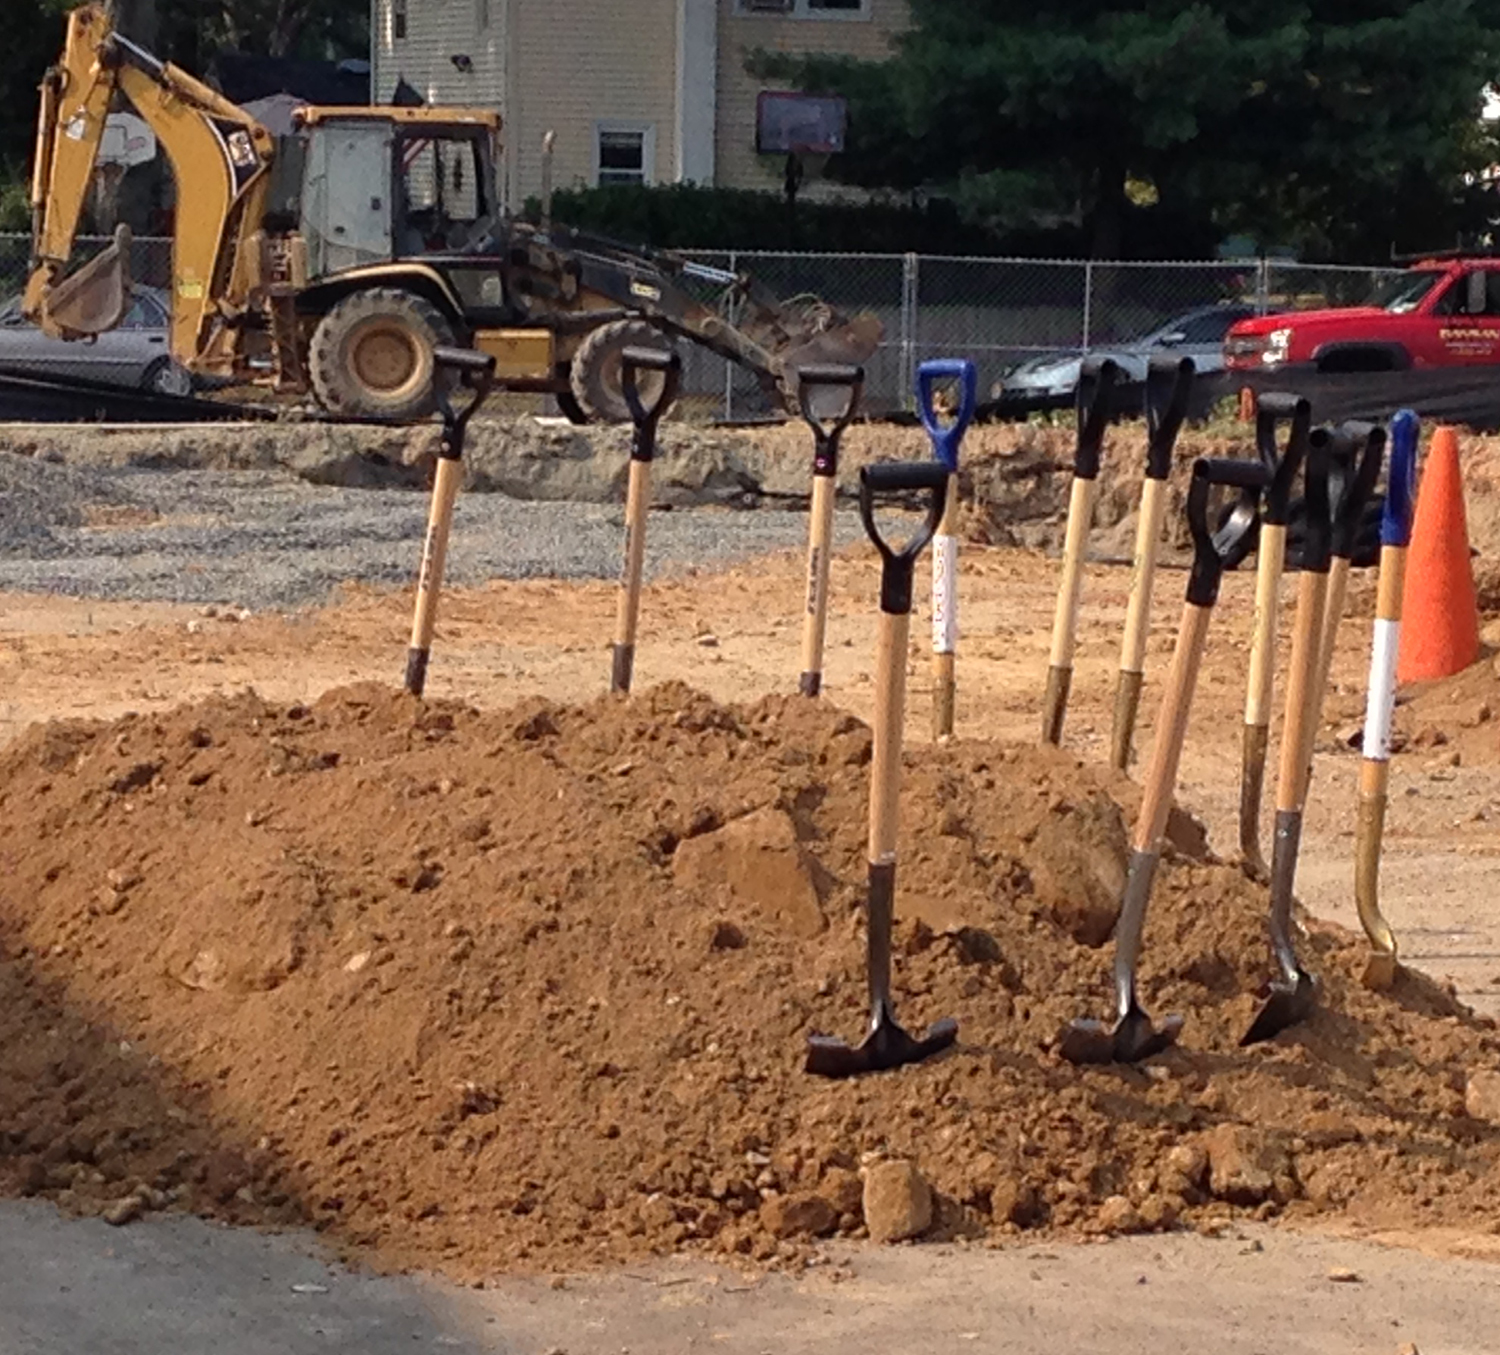 Shovels are stuck in the ground.